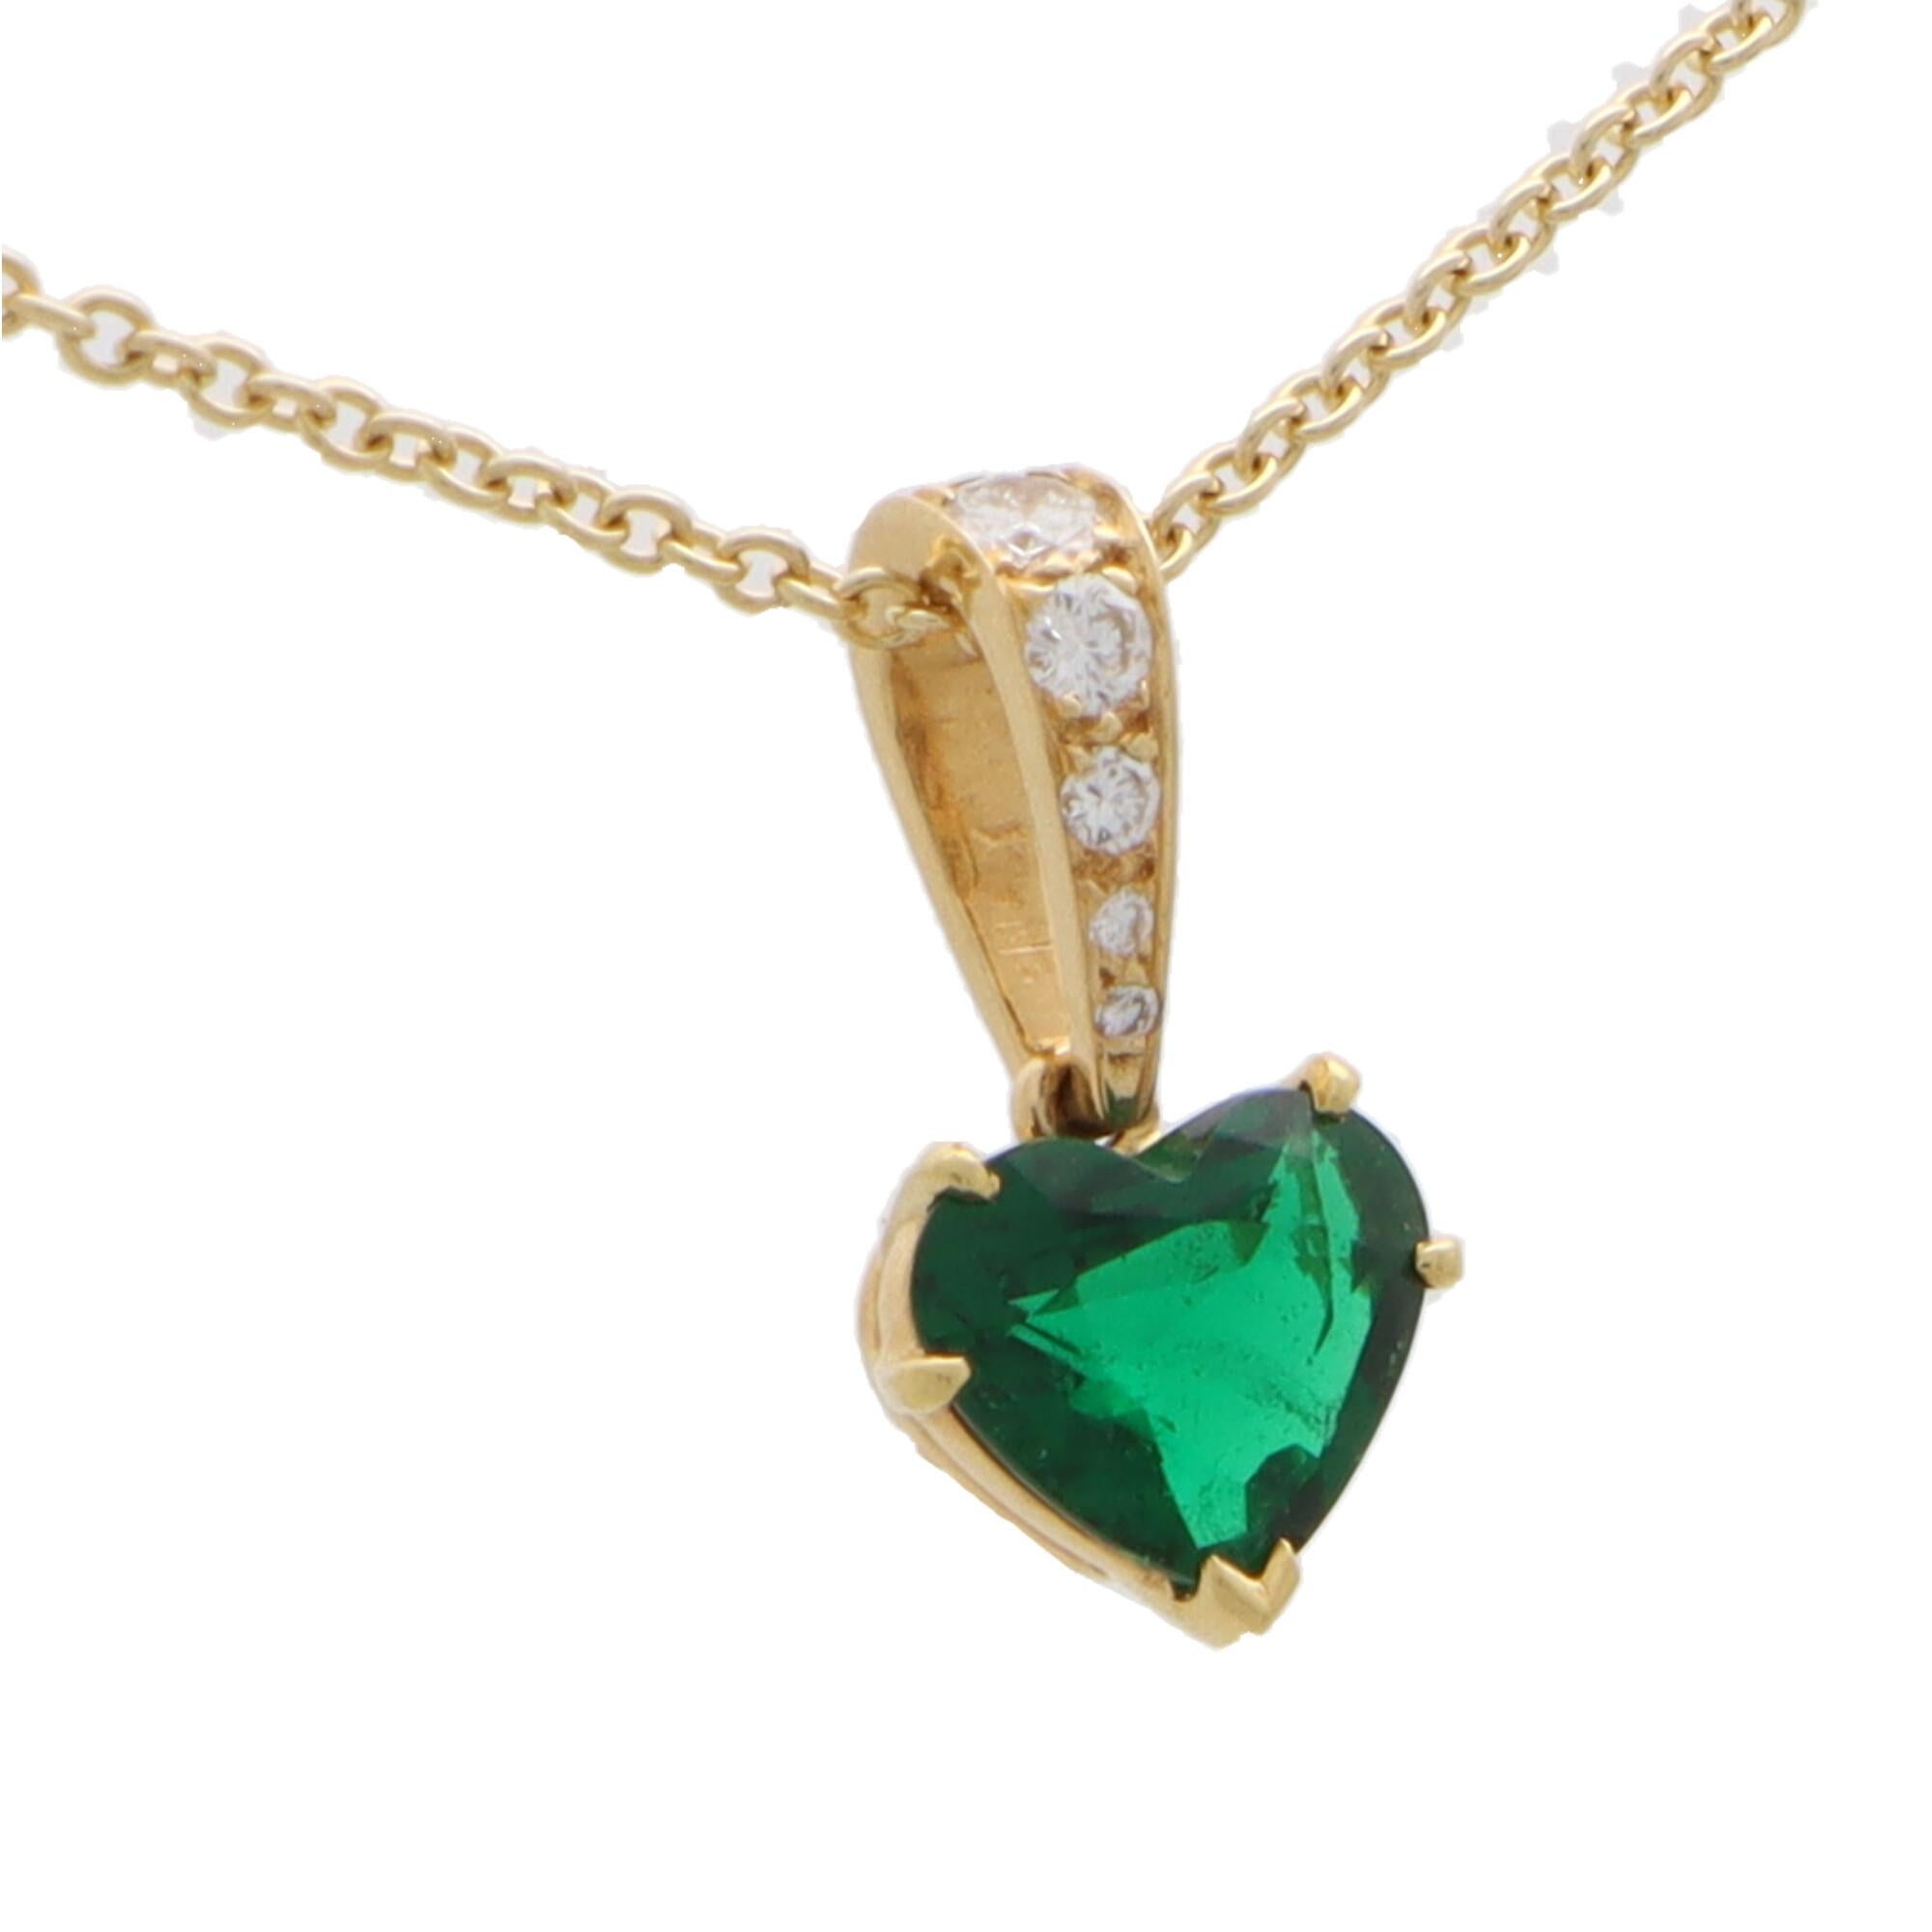 Modern Vintage Cartier Heart Cut Emerald and Diamond Pendant in 18k Yellow Gold